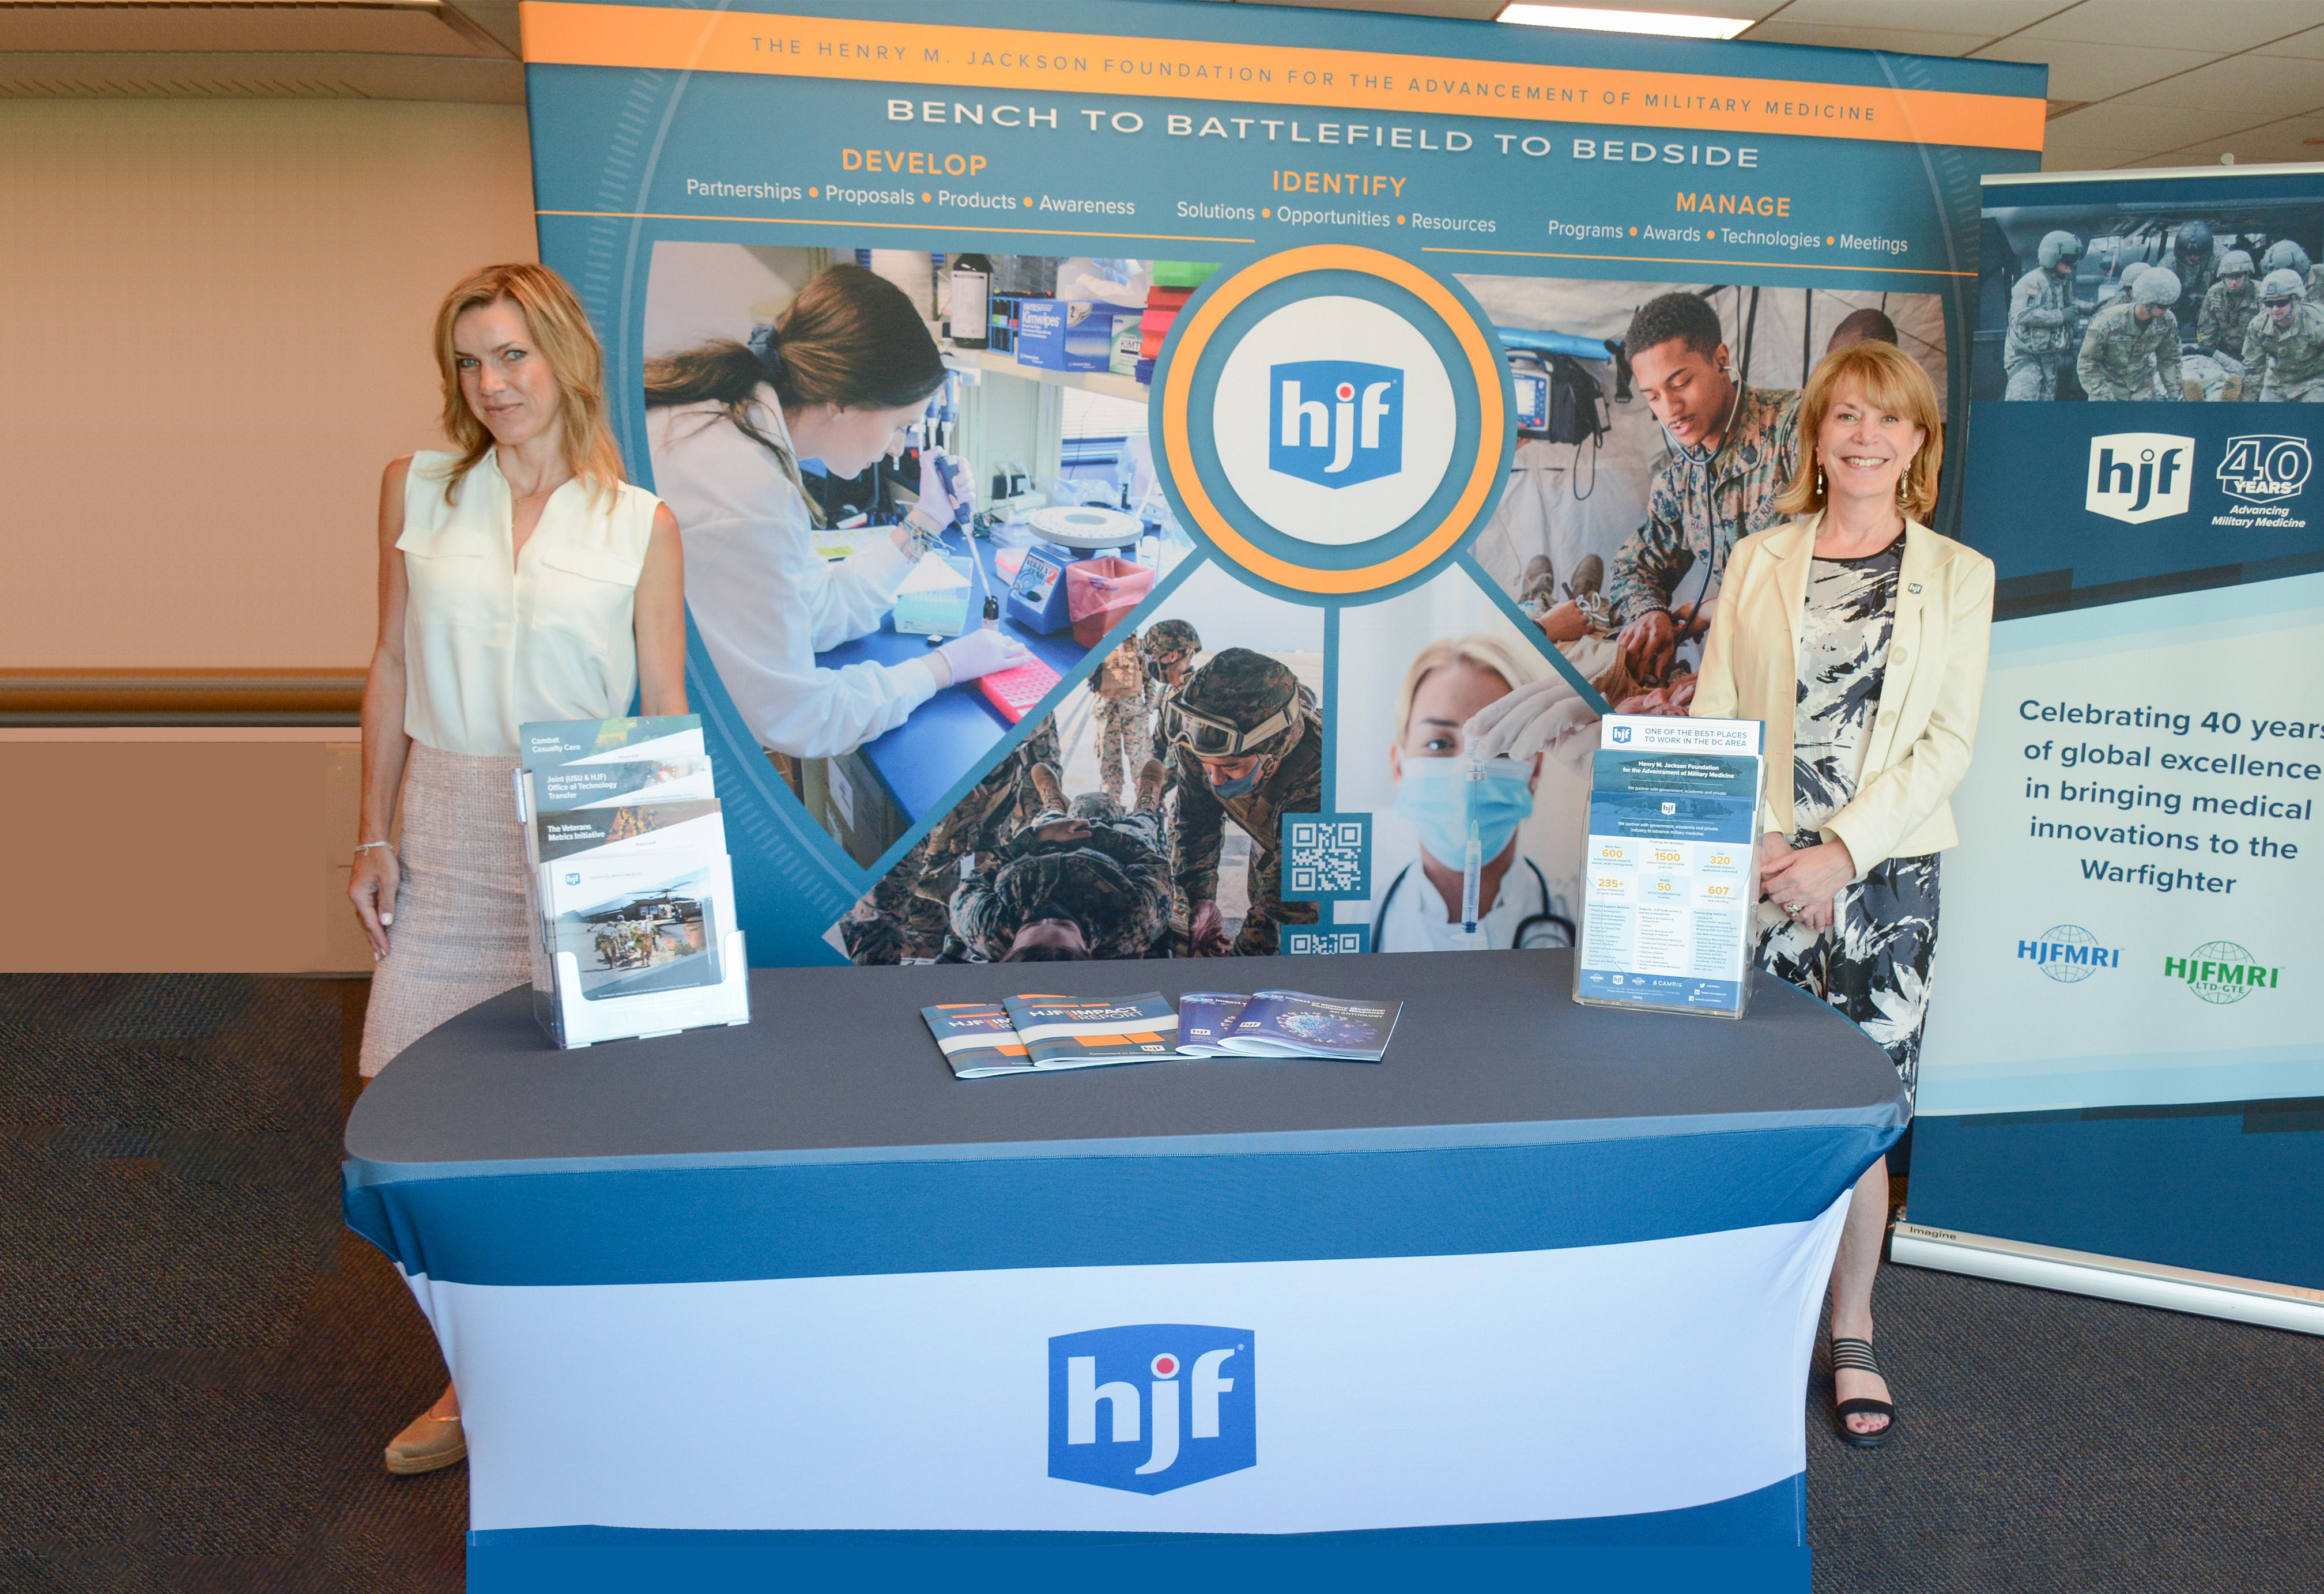 HJF business development team in front of trade booth